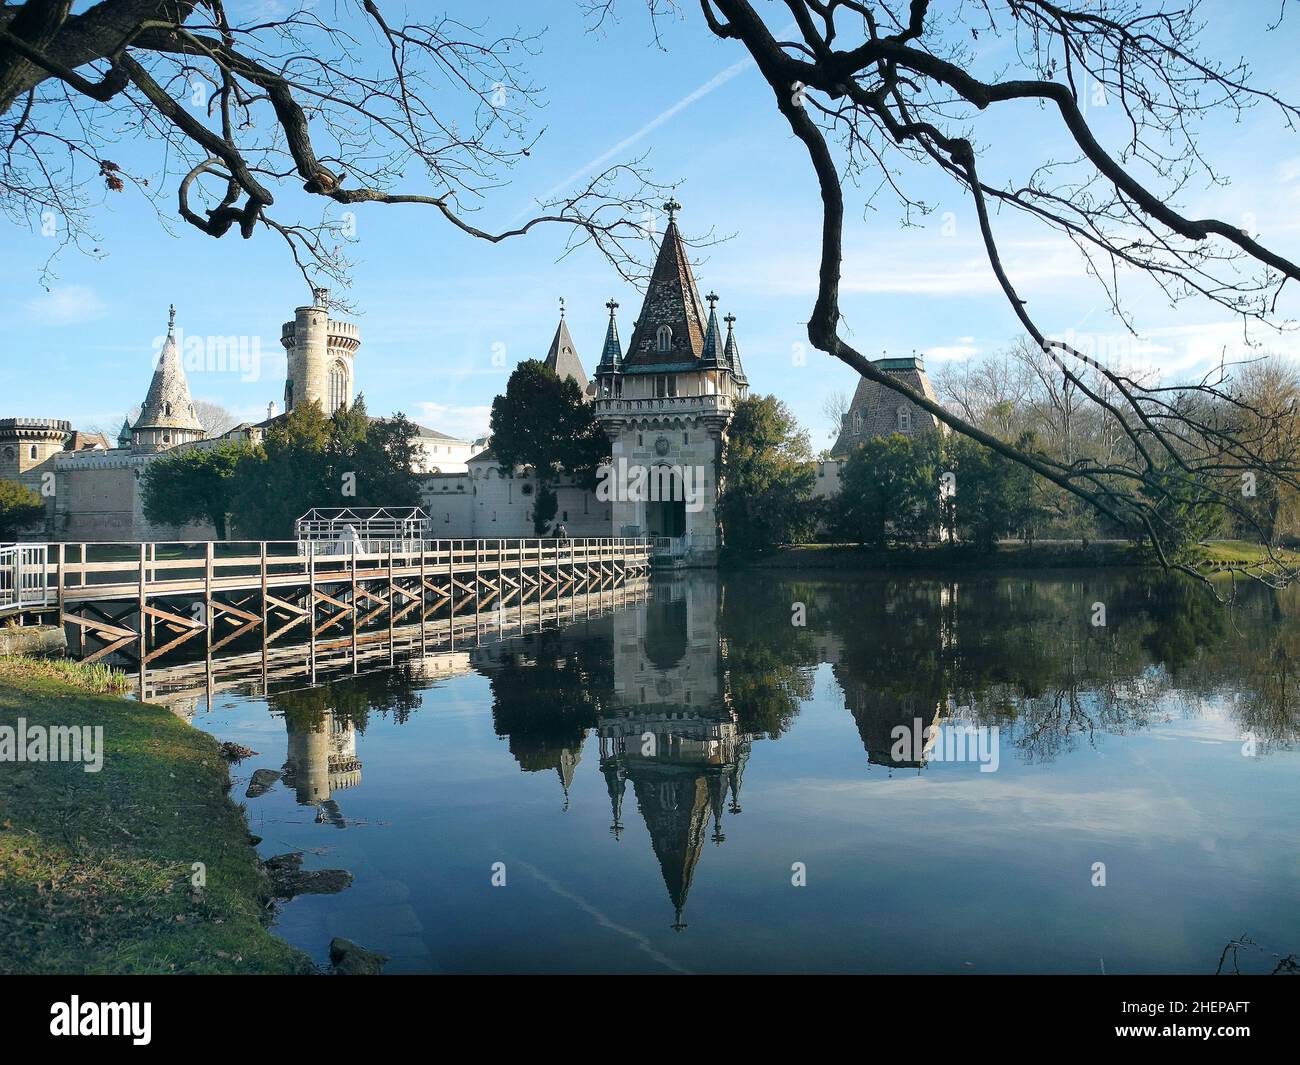 Laxenburg, Austria - January 02, 2022: Castle pond with a walkway for visitors to Franzensburg Castle with reflection in the lake, a small ferry opera Stock Photo